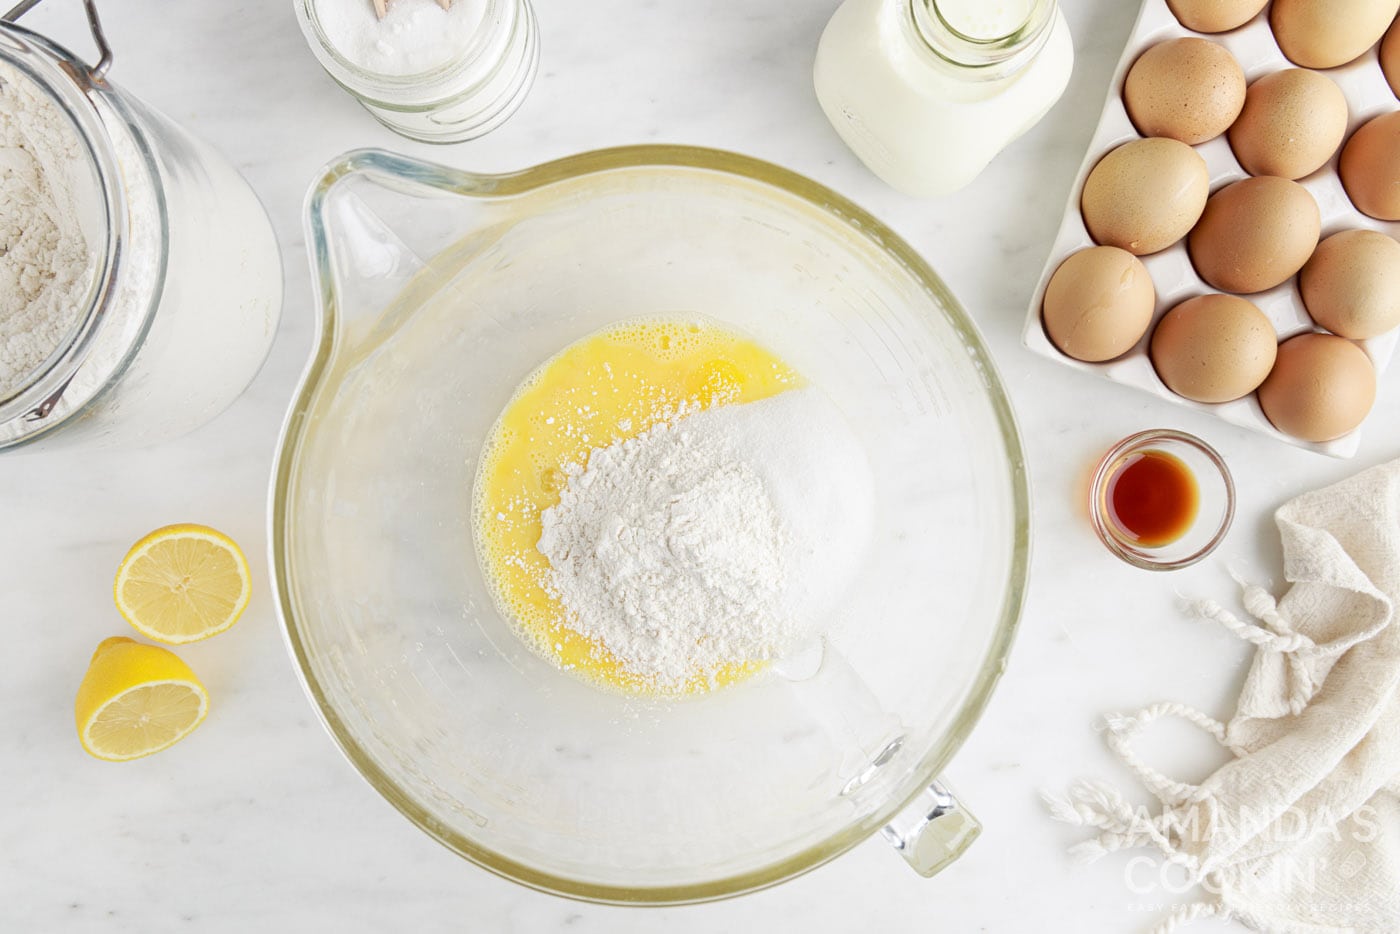 sugar, flour, and egg in a mixing bowl